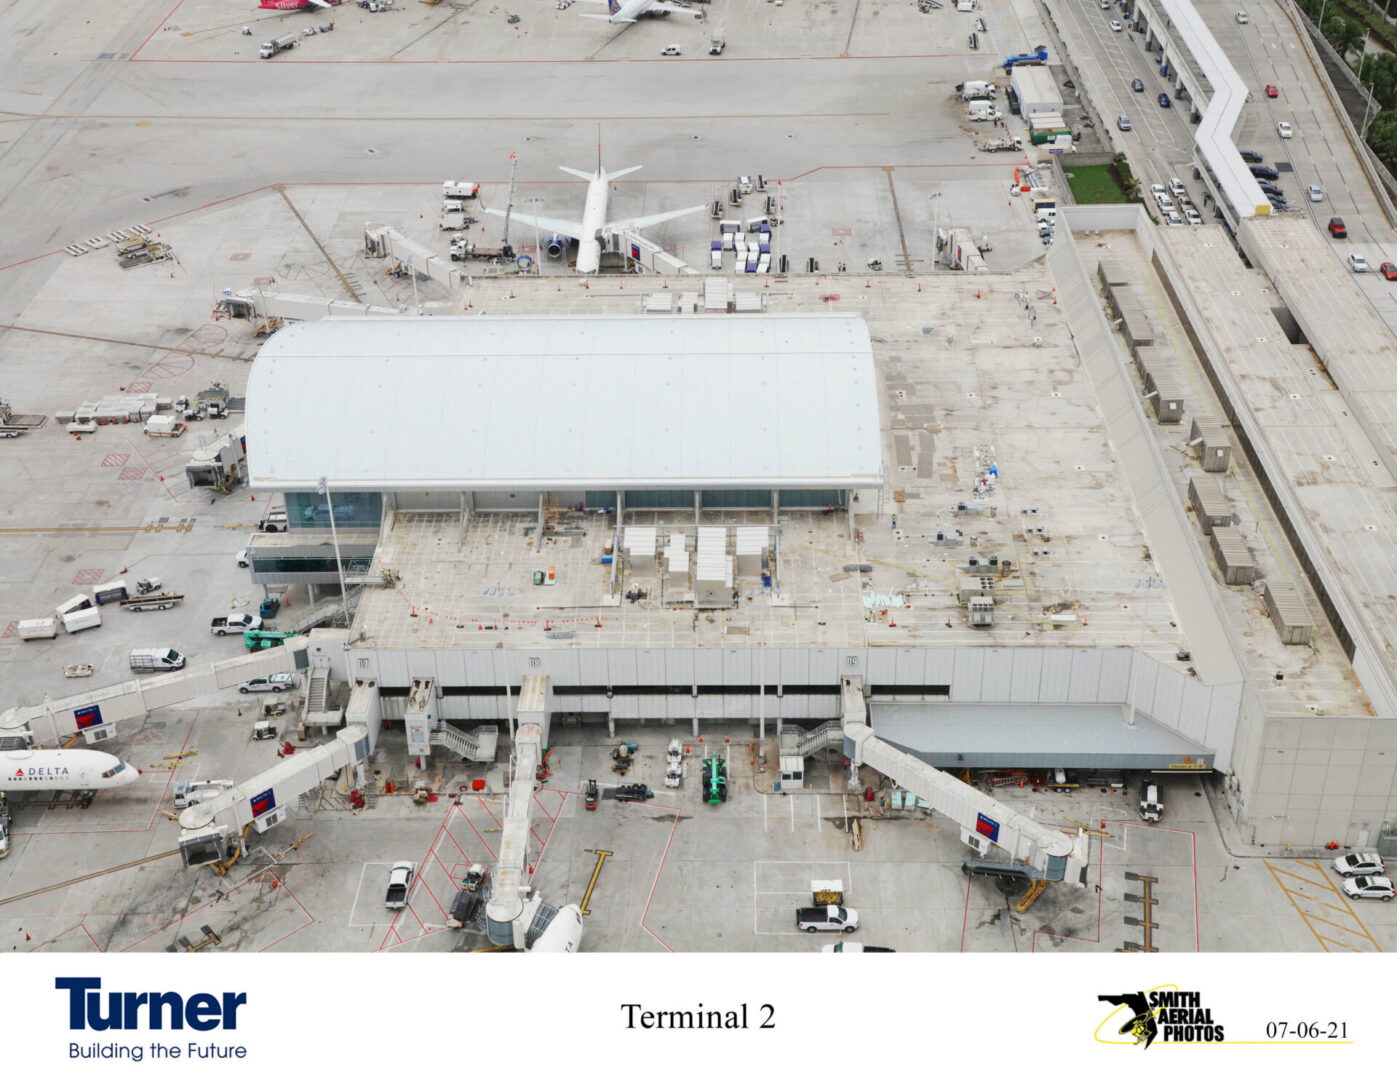 An aerial view of a airport terminal showcasing past projects.